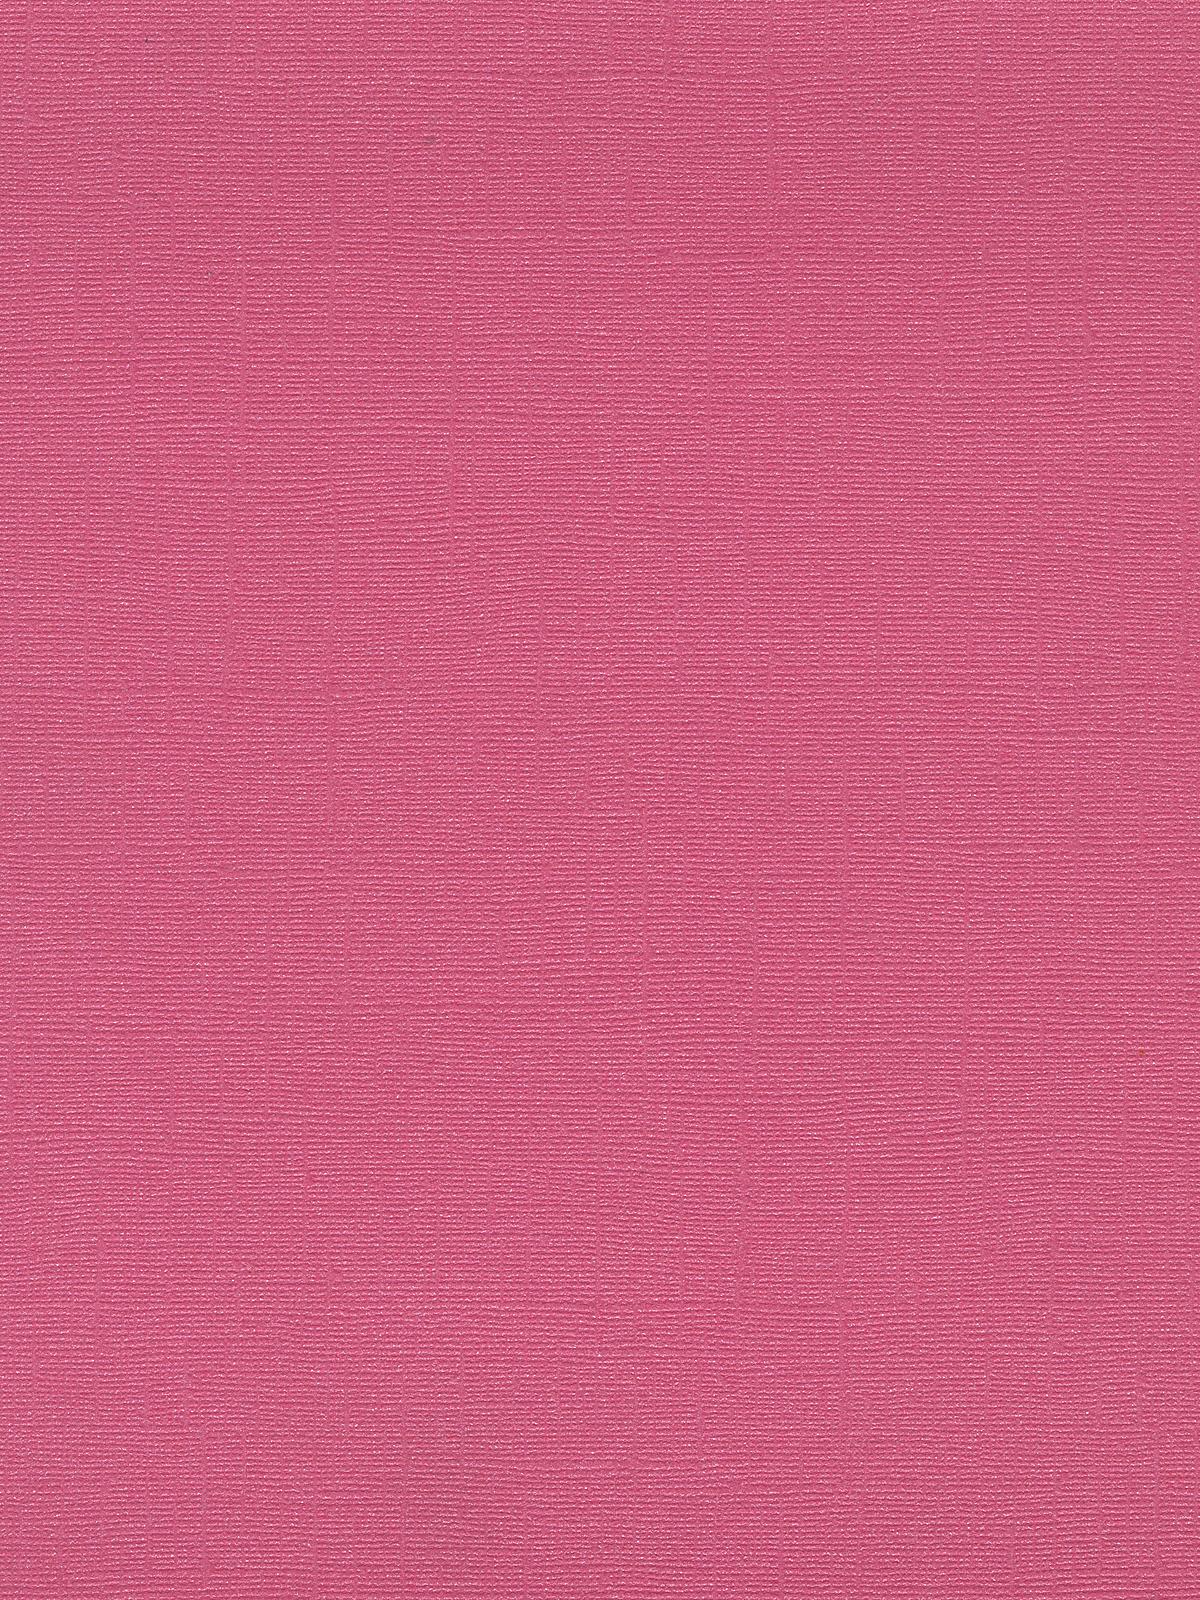 Bling Cardstock 8 1 2 In. X 11 In. Sheet Feather Boa